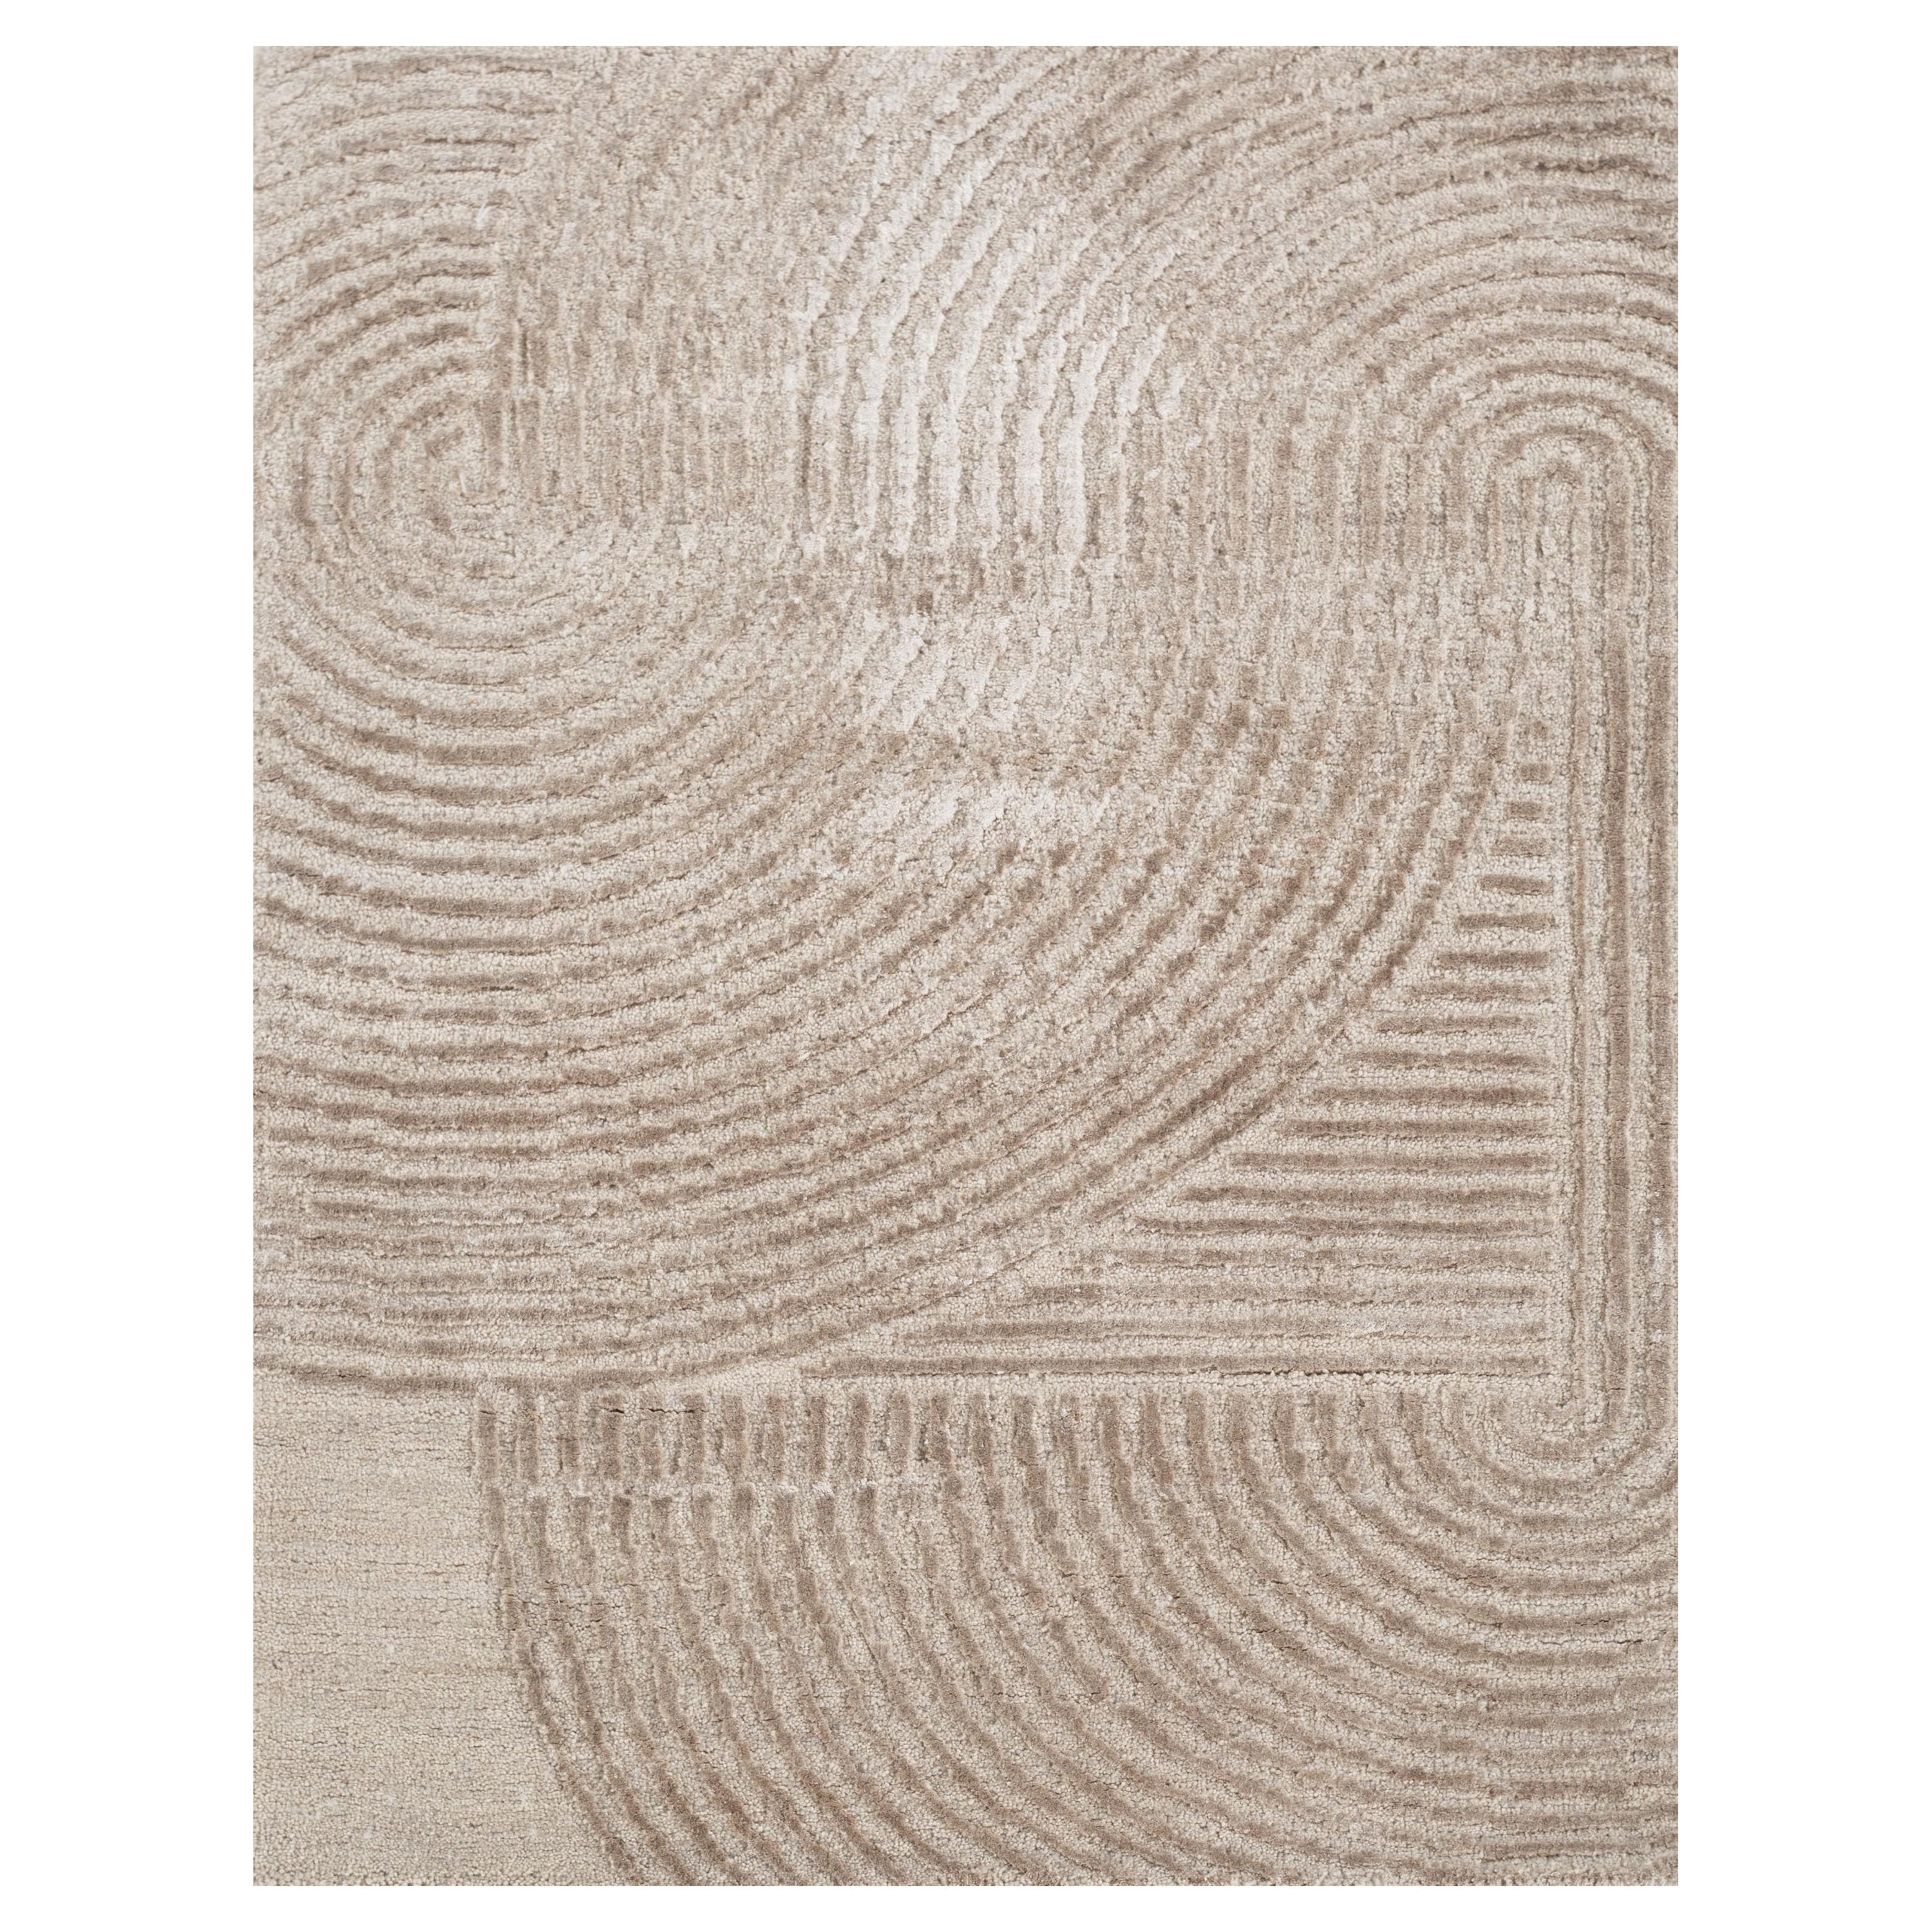 Sun-Kissed Bliss Antique White & White Sand 130X130 cm Handknotted Rug For Sale